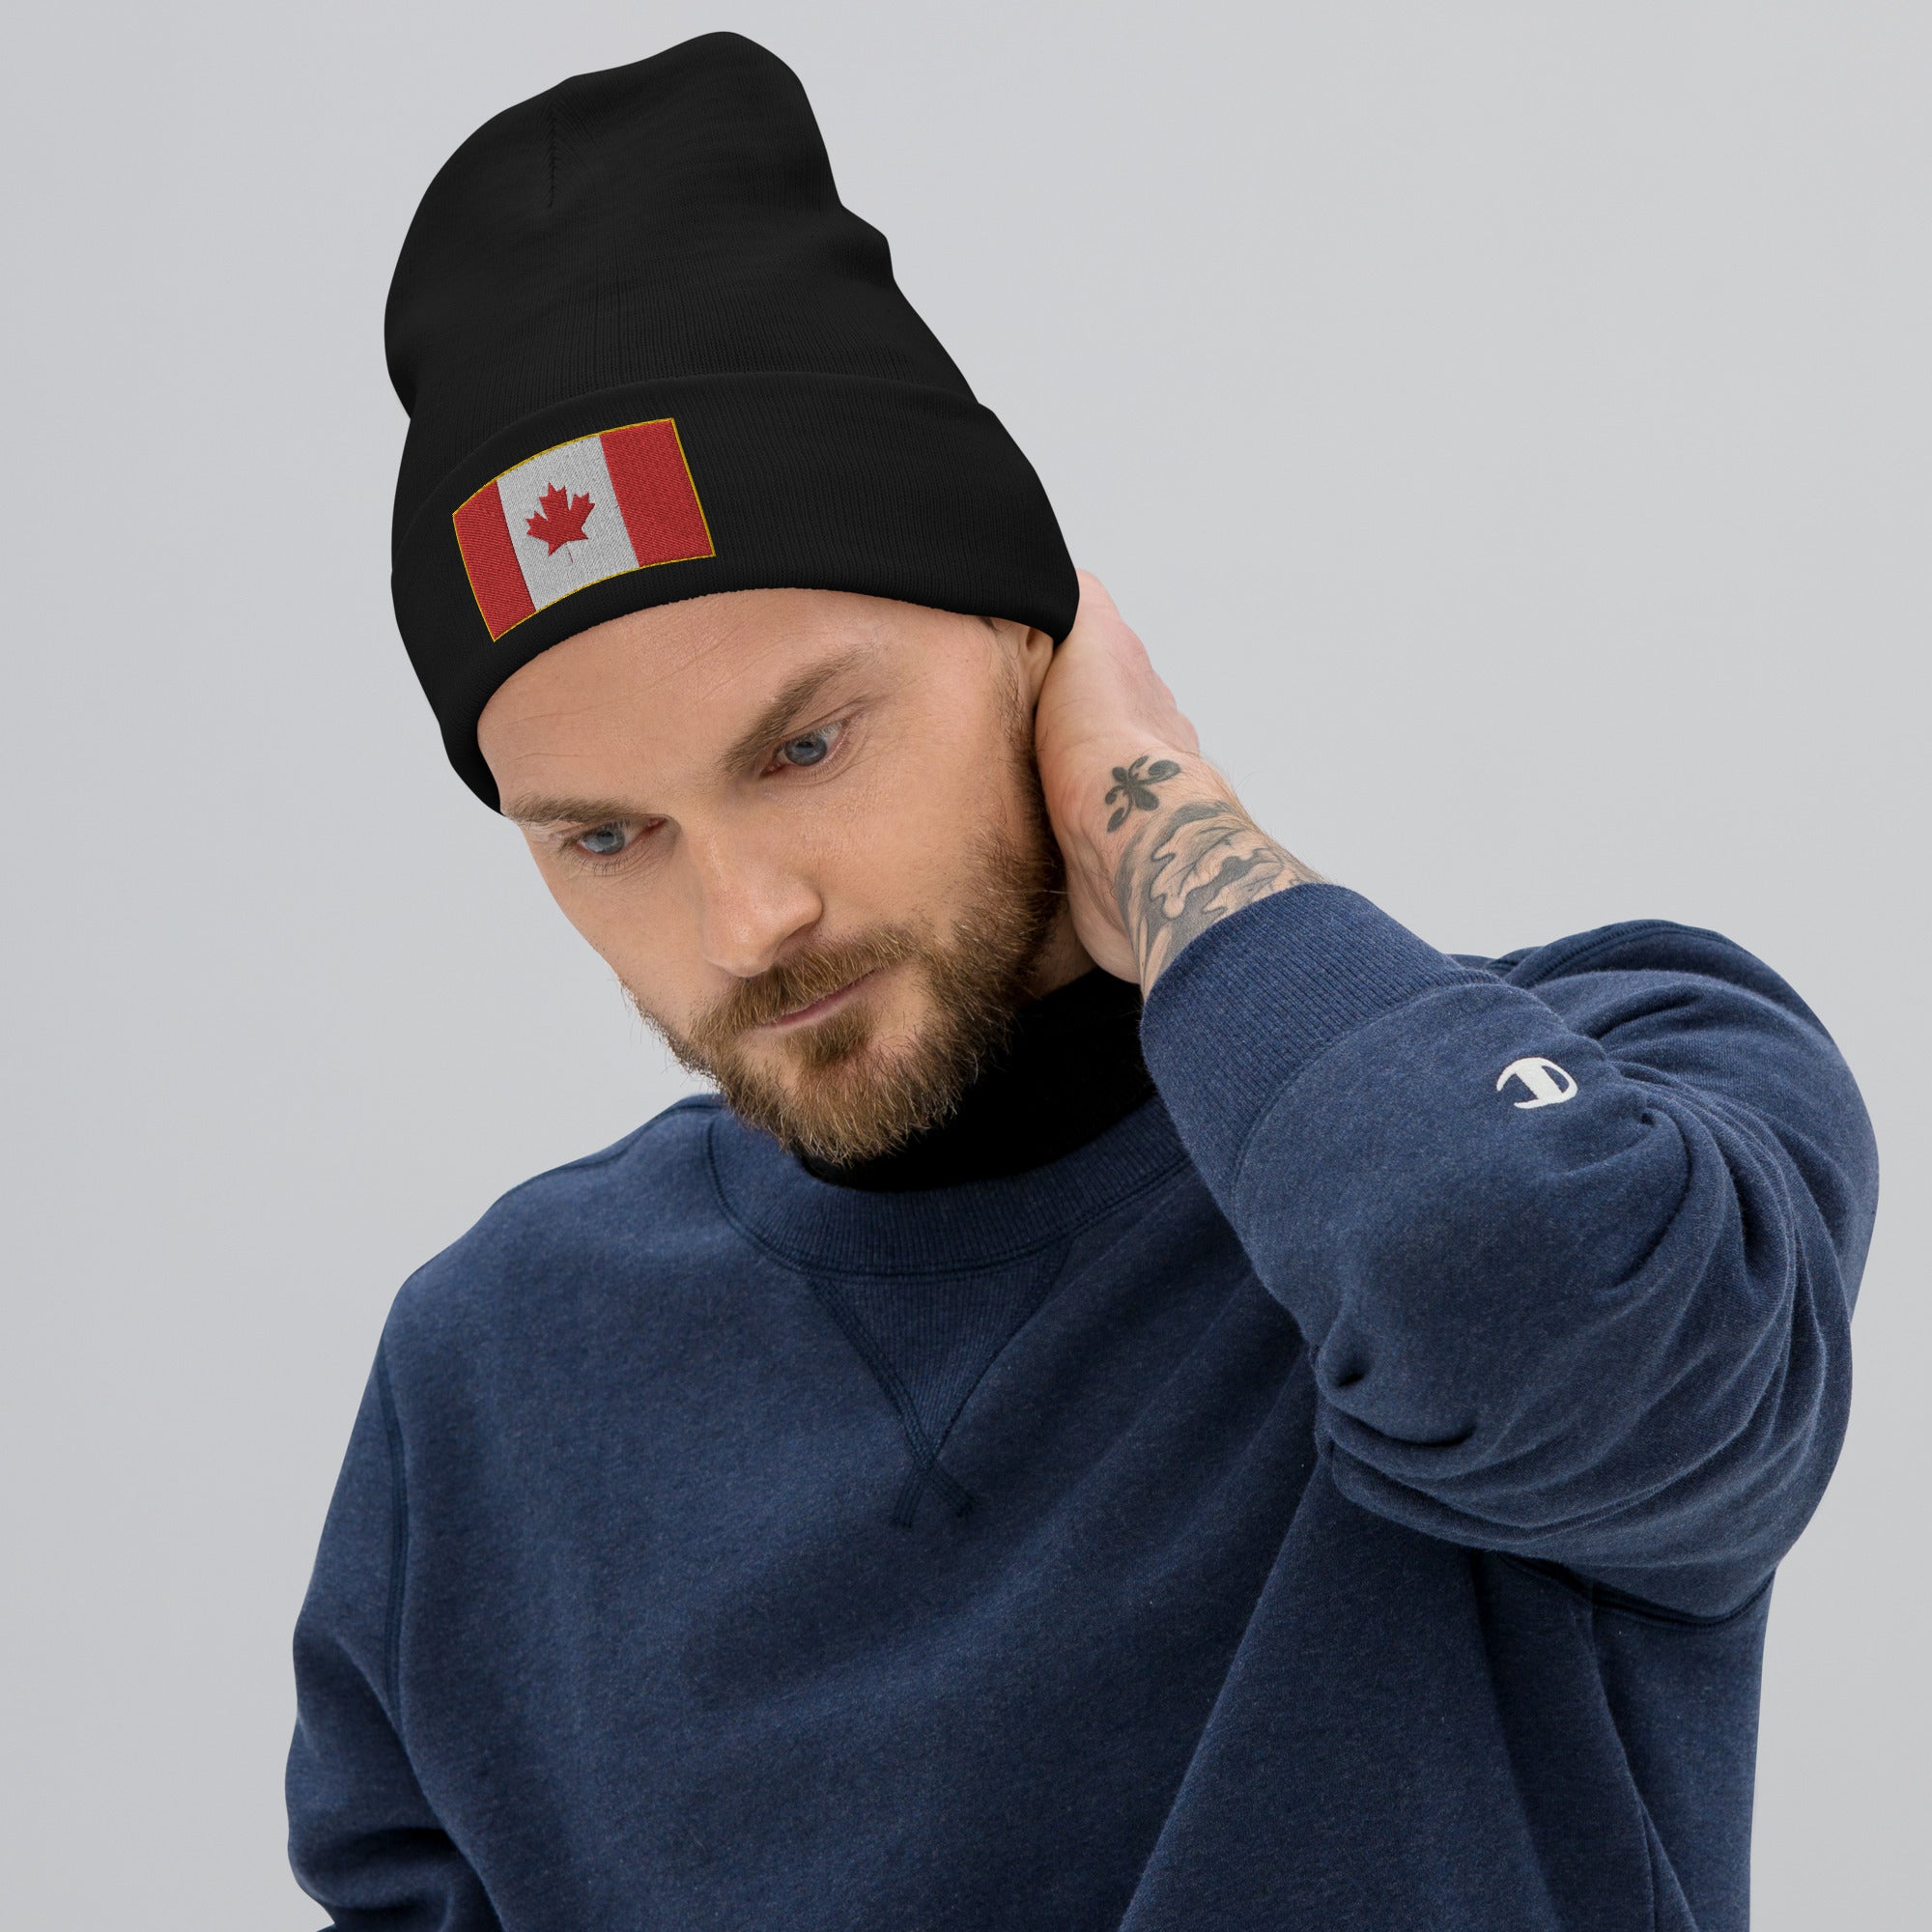 The National Flag of Canada Embroidered Cuff Beanie - Edge of Life Designs